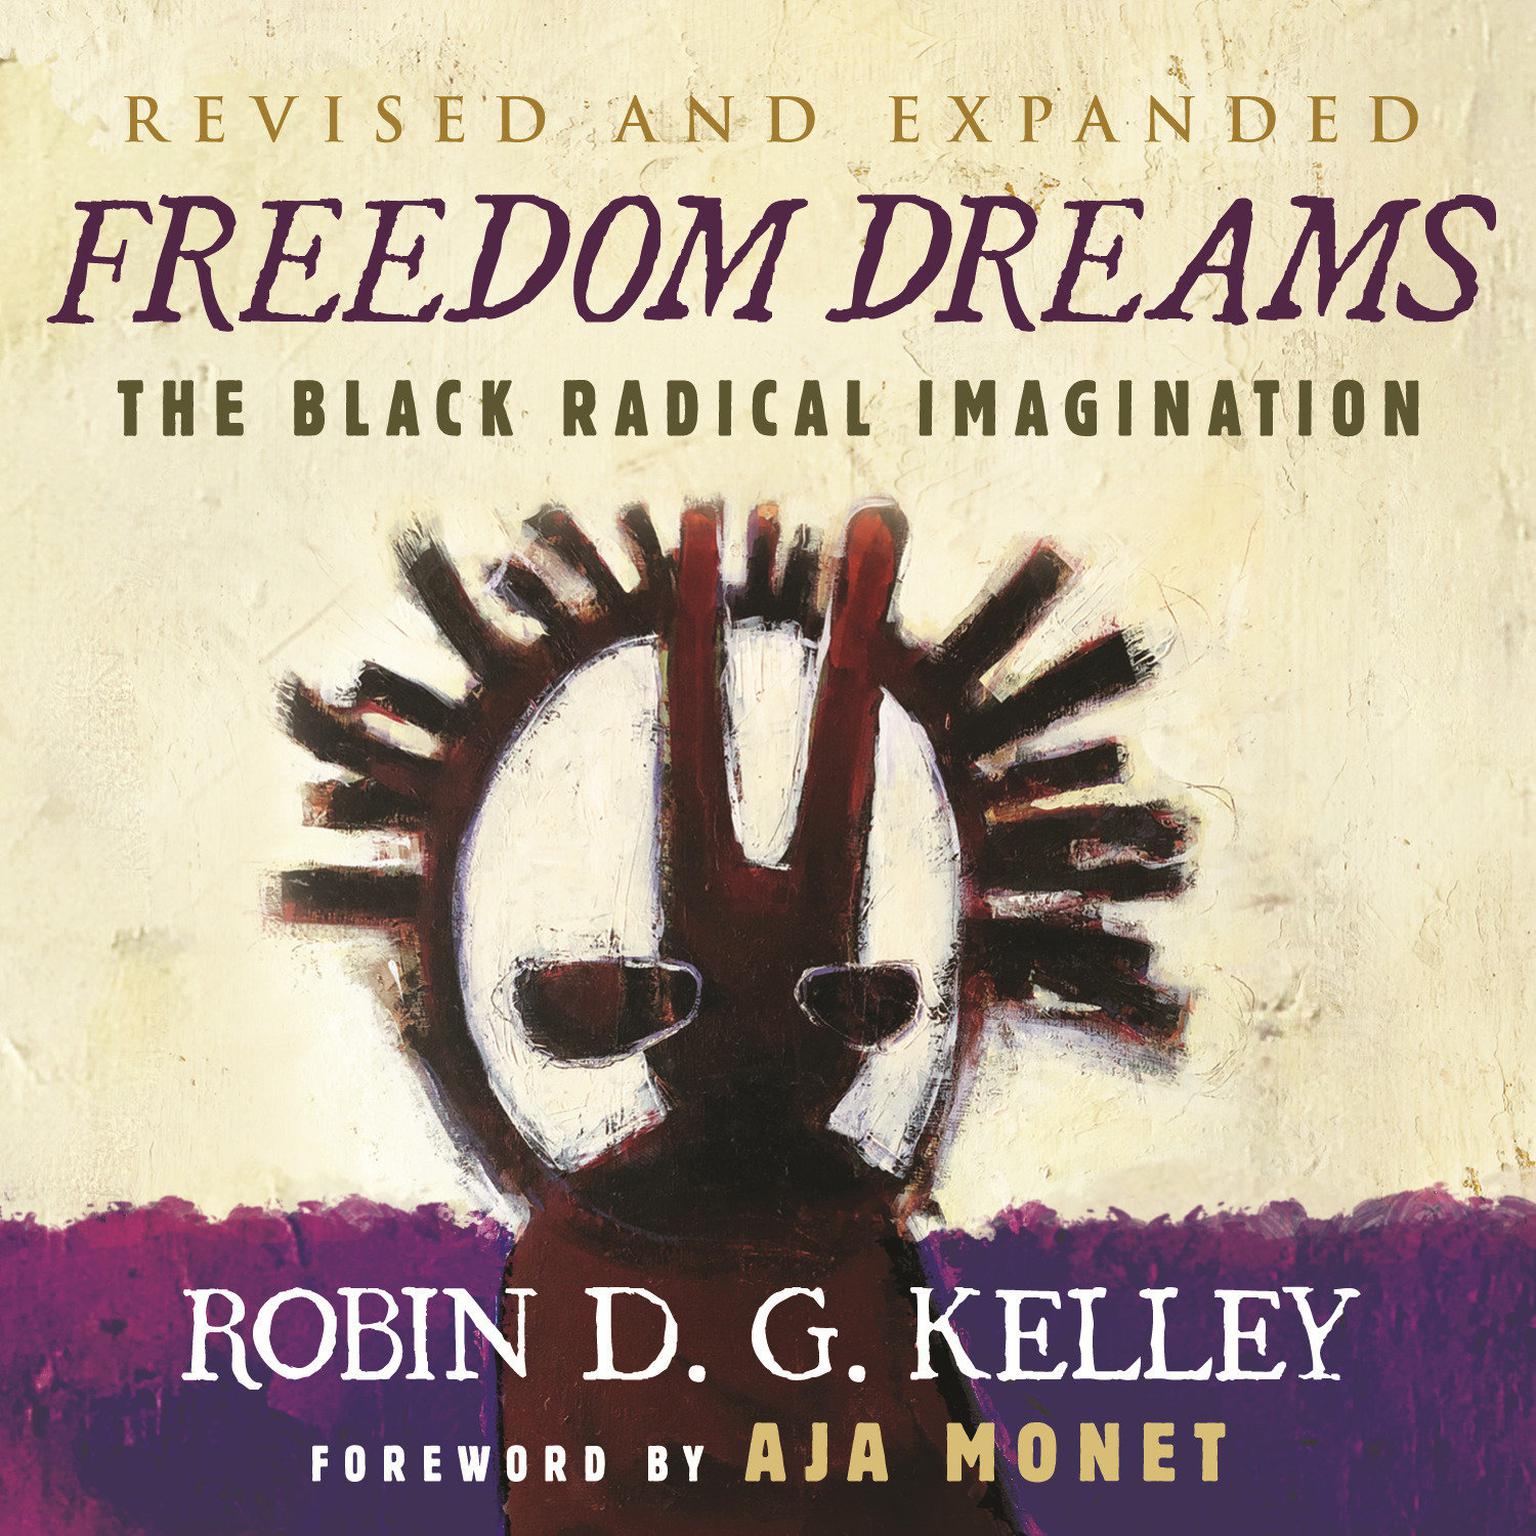 Freedom Dreams: The Black Radical Imagination Audiobook, by Robin D. G. Kelley